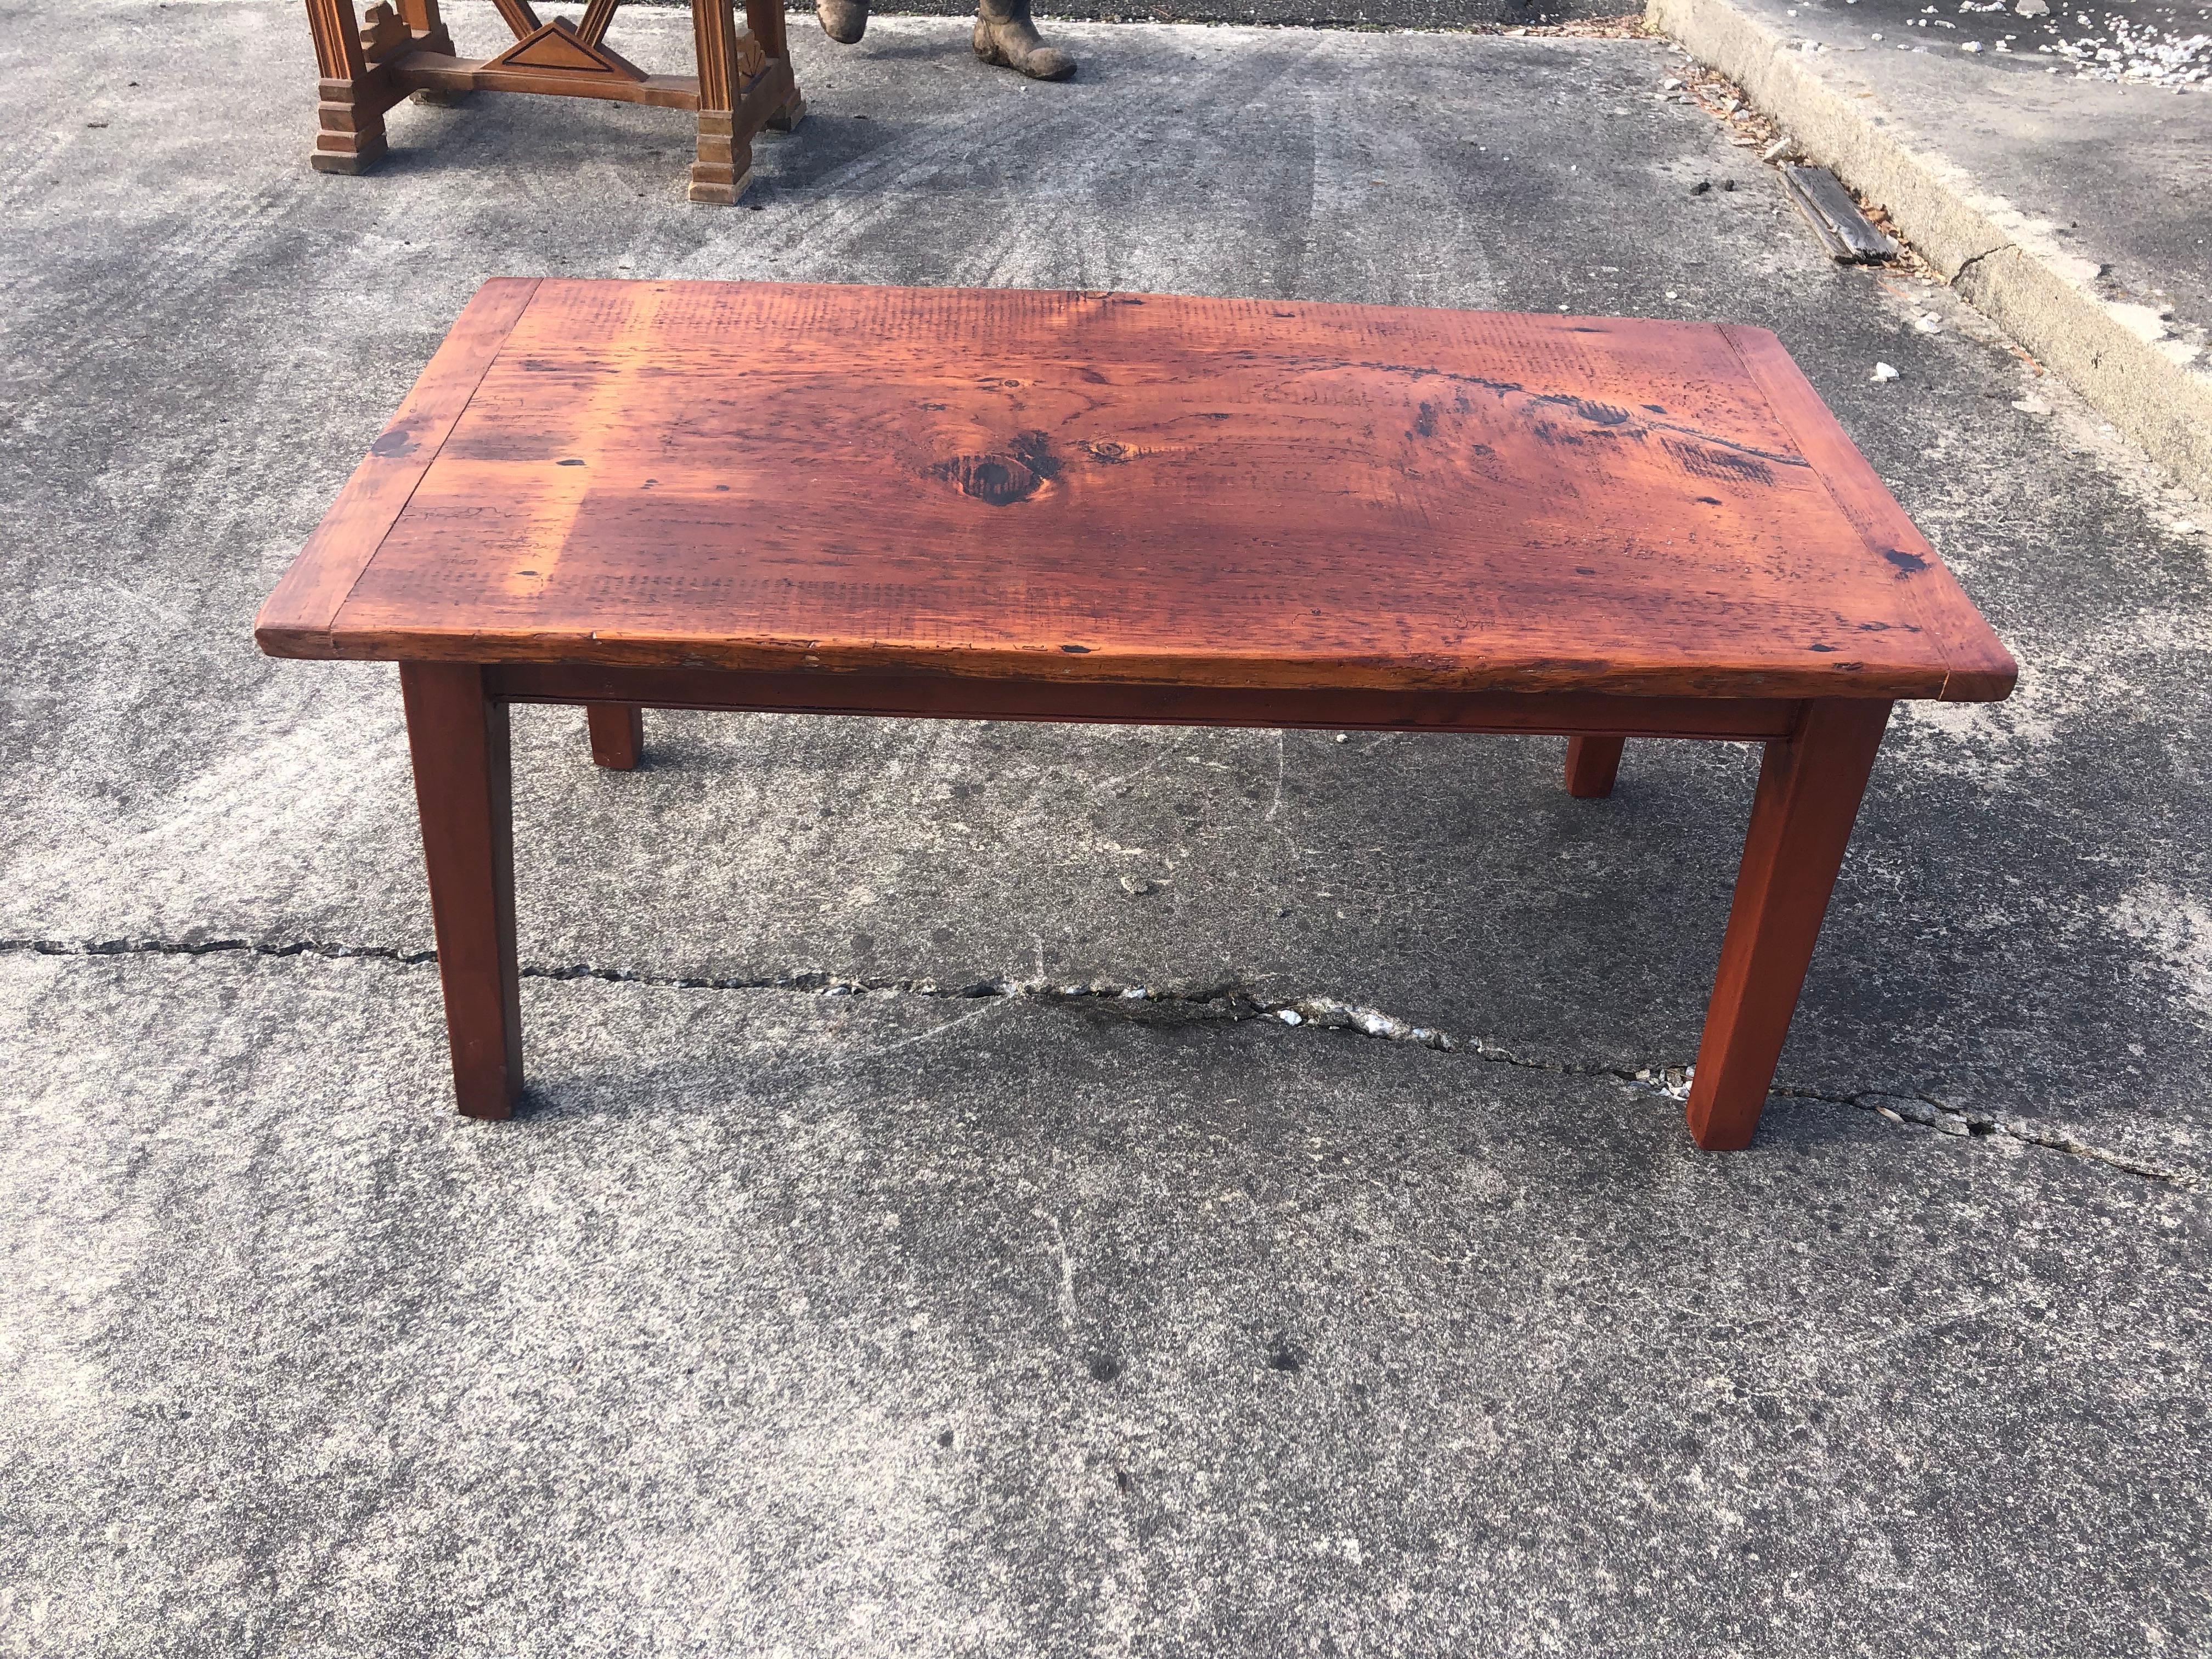 Handcrafted pine plank coffee table by Maine artisan. Legs are simple tapered design and top has beautiful rustic character. The table appears to have a slight ripple, natural to the barnwood that was salvaged.